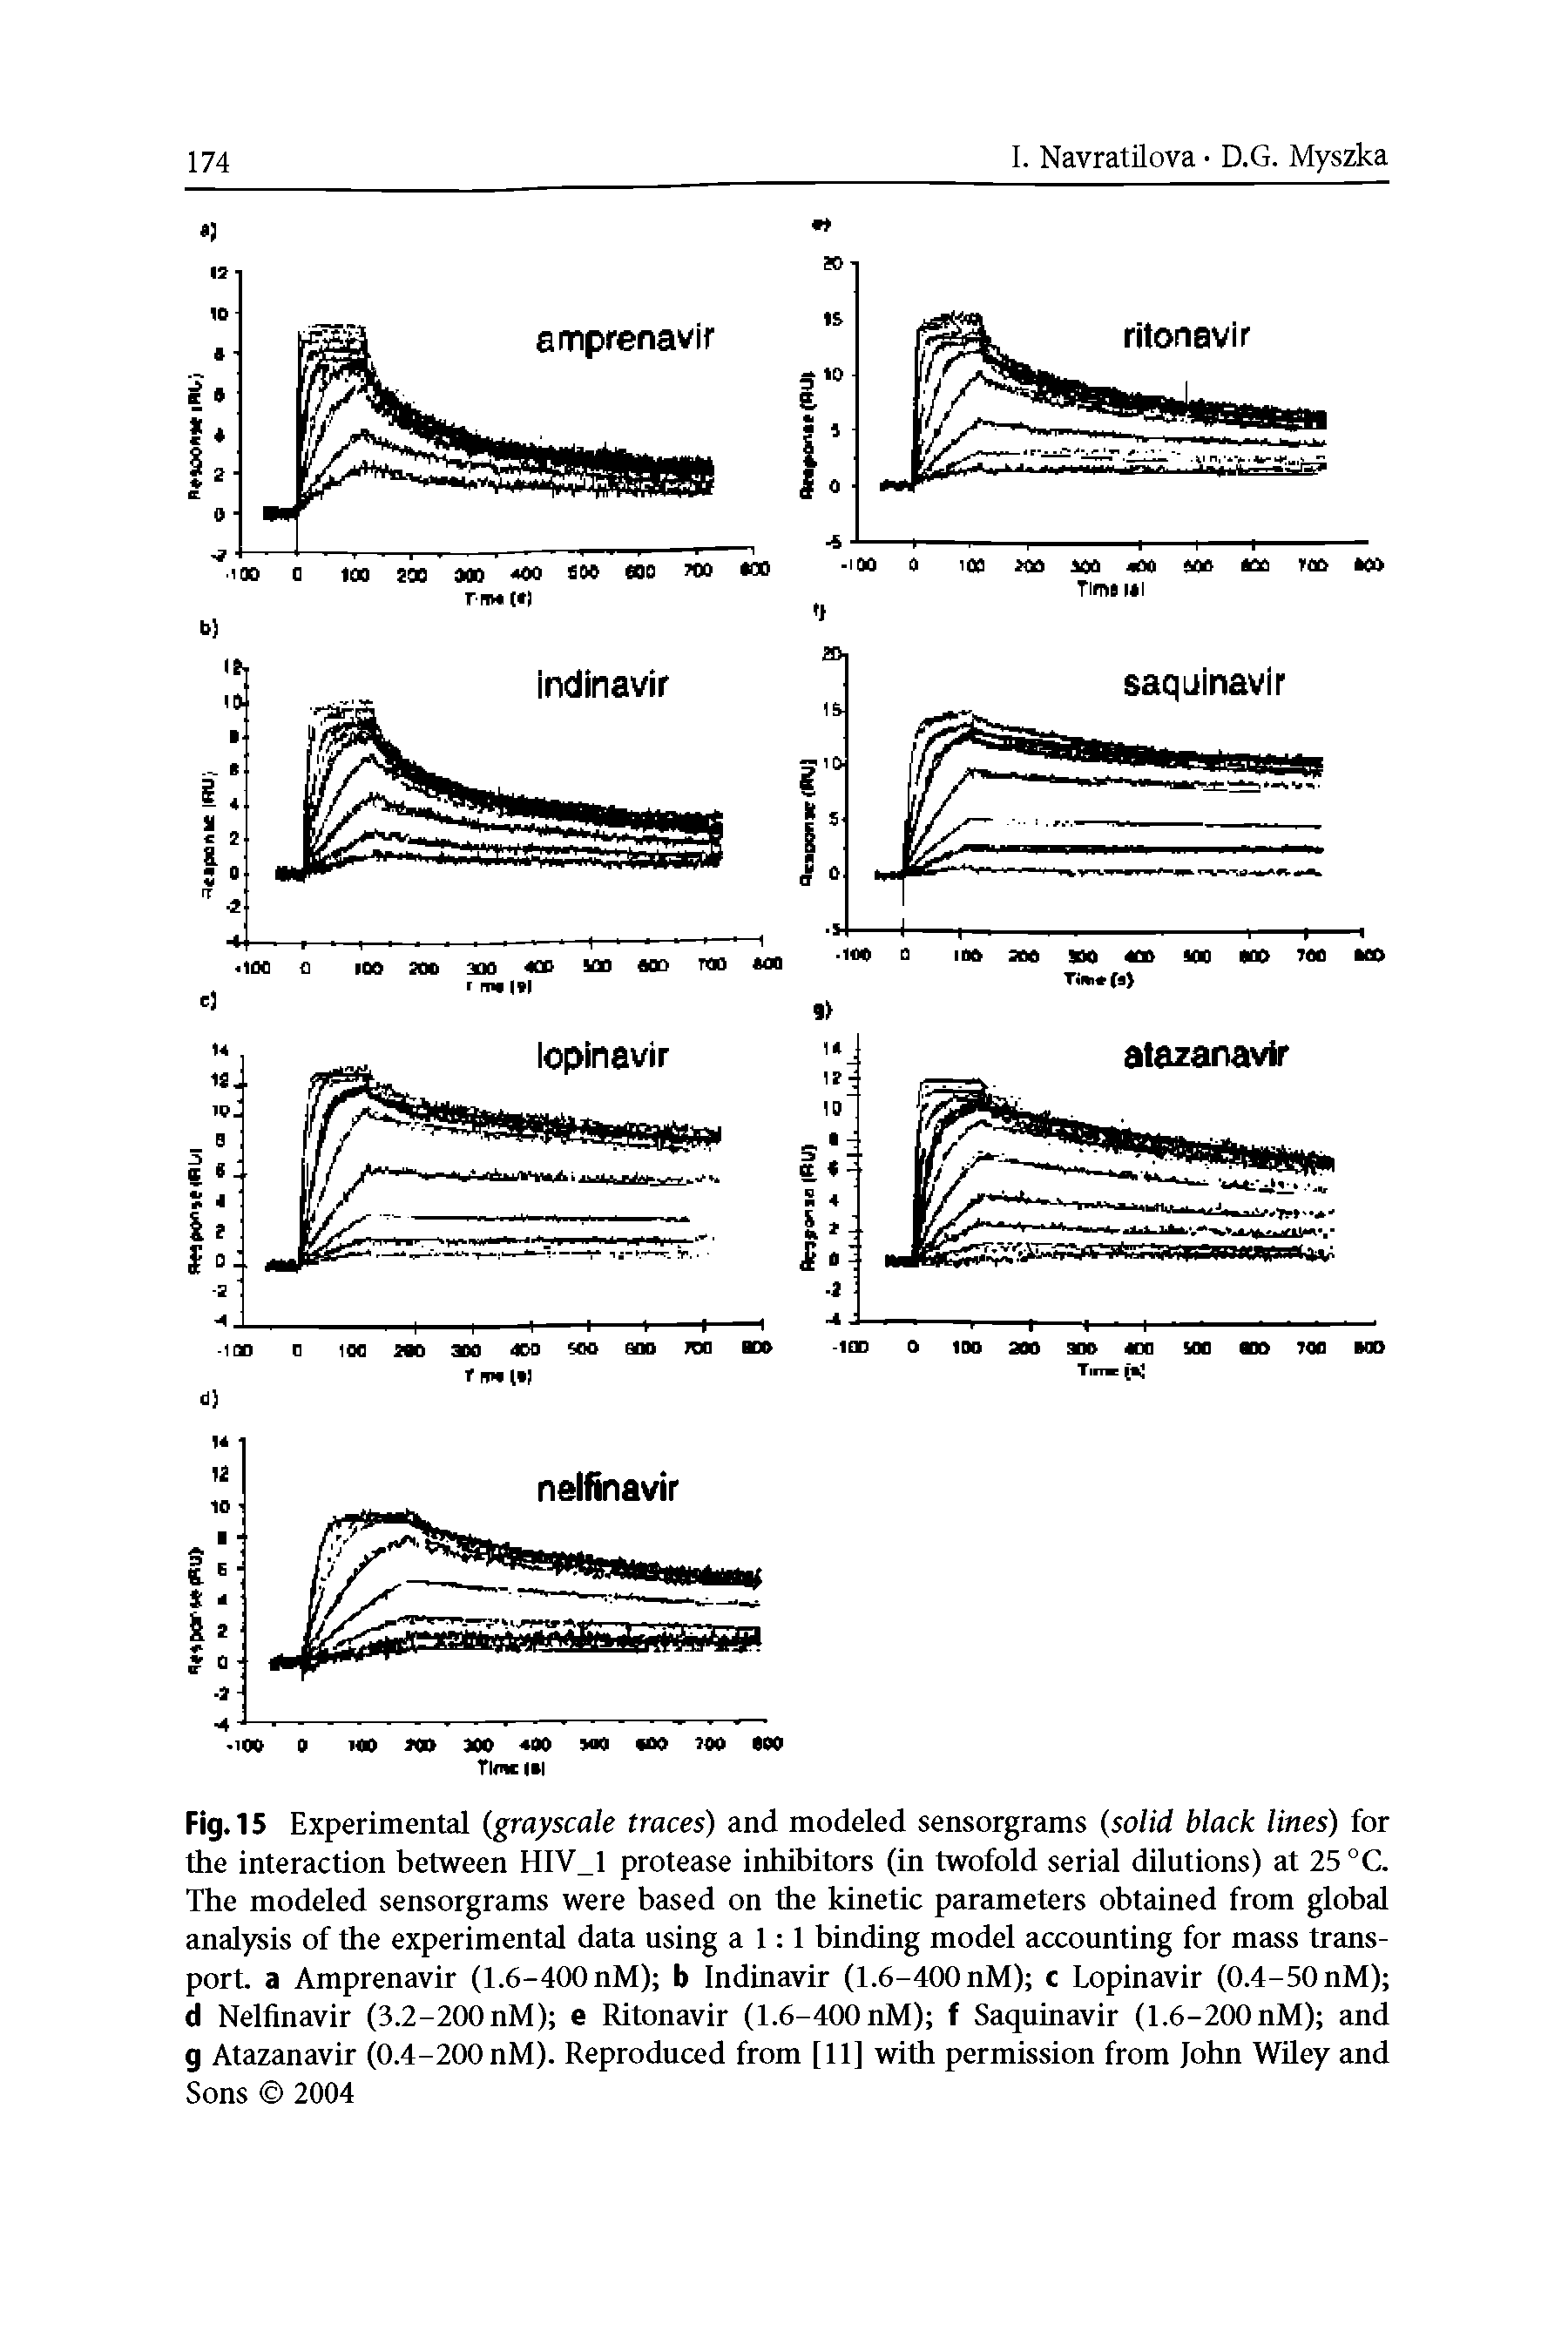 Fig. 15 Experimental (grayscale traces) and modeled sensorgrams (solid black lines) for the interaction between HIV 1 protease inhibitors (in twofold serial dilutions) at 25 °C. The modeled sensorgrams were based on the kinetic parameters obtained from global analysis of the experimental data using a 1 1 binding model accounting for mass transport. a Amprenavir (1.6-400 nM) b Indinavir (1.6-400 nM) c Lopinavir (0.4-50 nM) d Nelfinavir (3.2-200nM) e Ritonavir (1.6-400 nM) f Saquinavir (1.6-200nM) and g Atazanavir (0.4-200 nM). Reproduced from [11] with permission from John Wiley and Sons 2004...